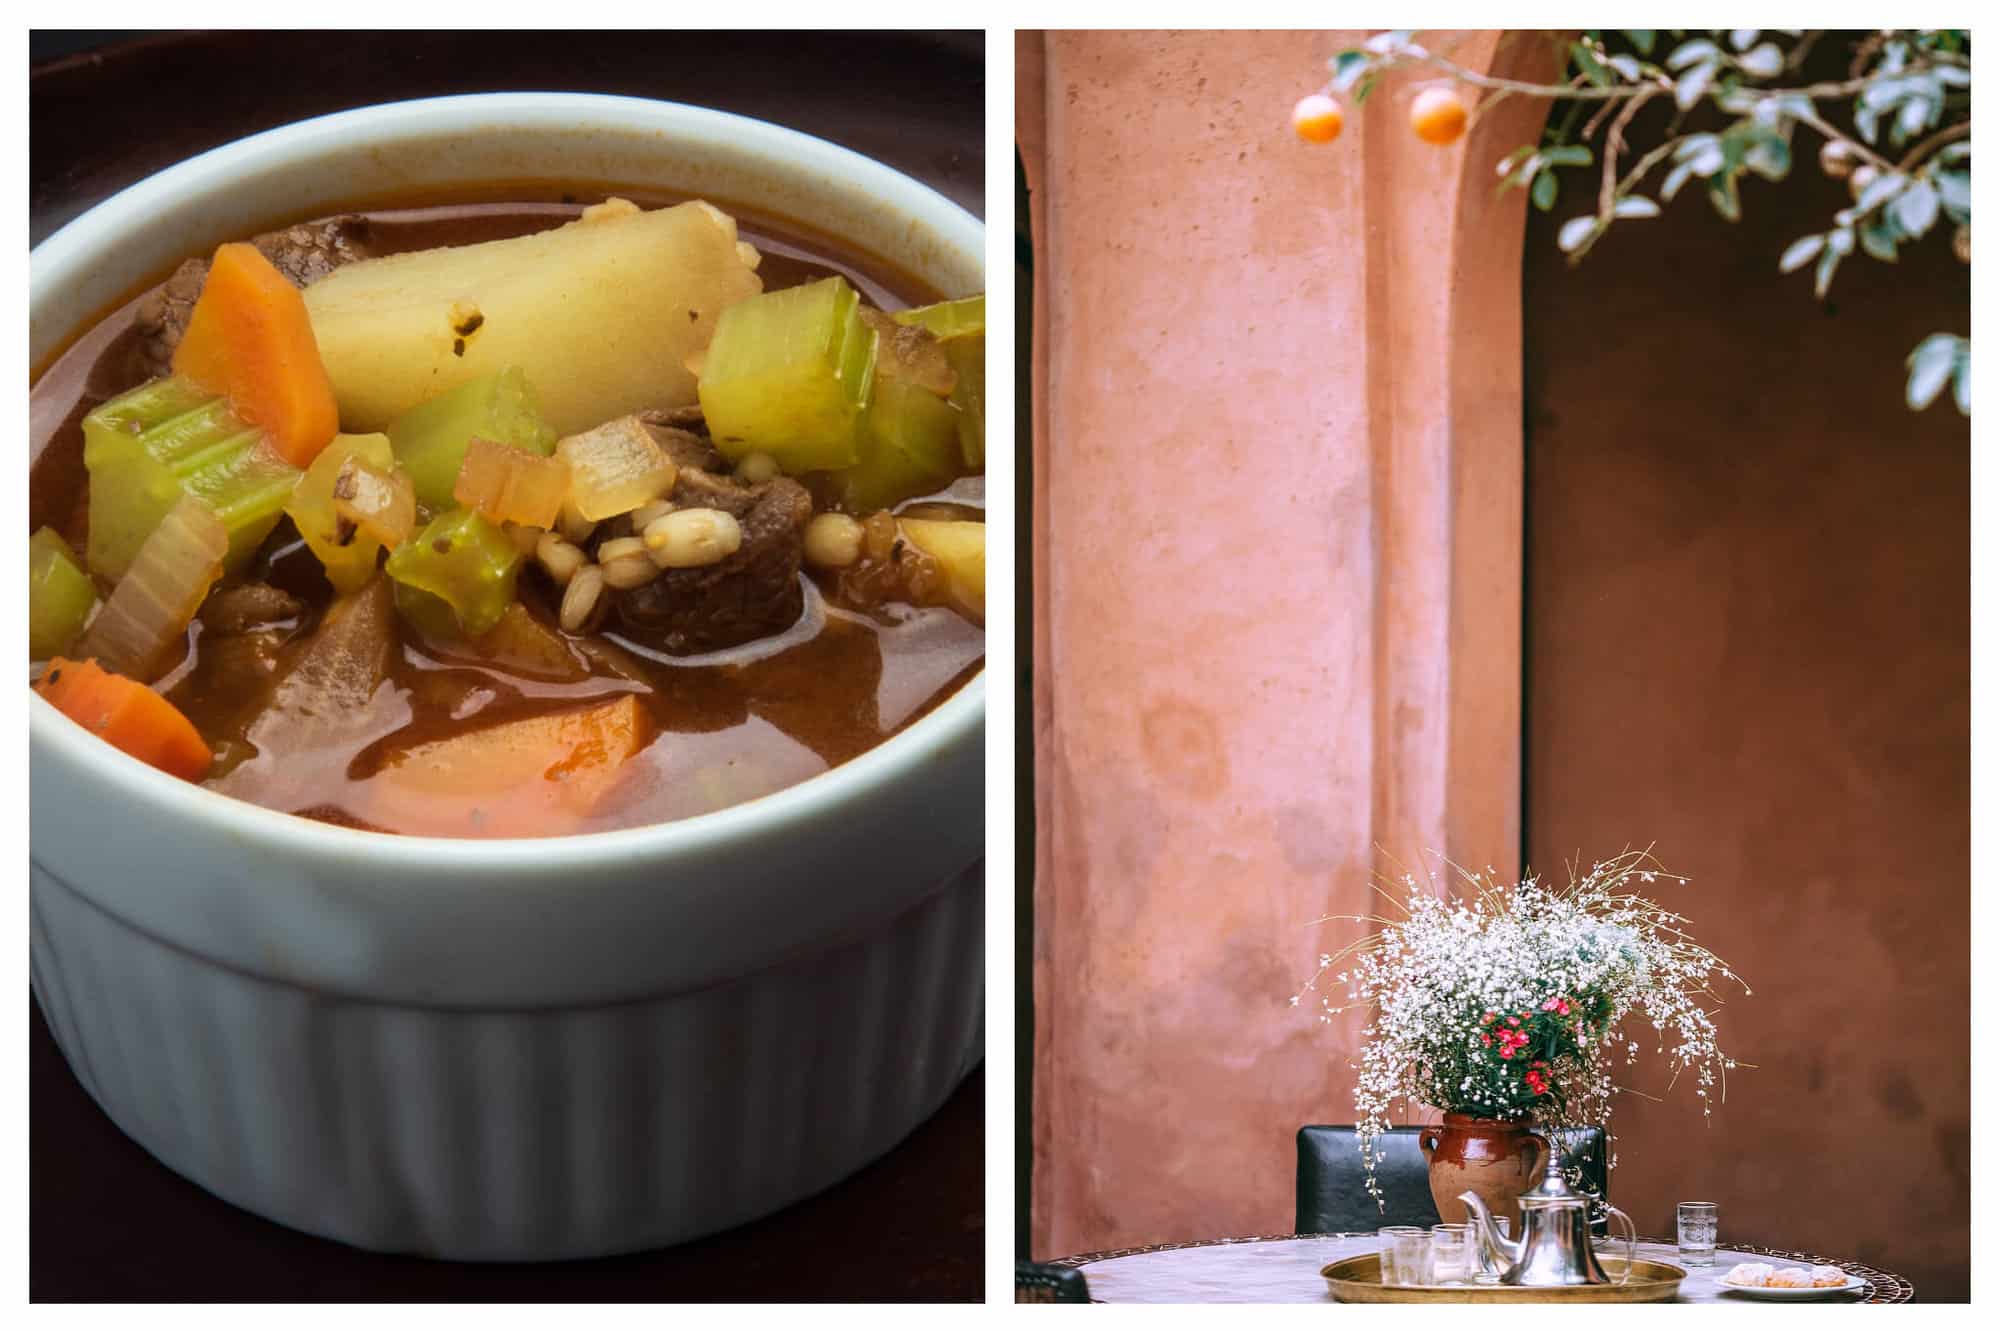 left: a bowl of pot au feu with vegetables and soup. right: a table setting with a terracota vase containing white flowers. on the background , an orange wall is visible and so are leaves of a tree